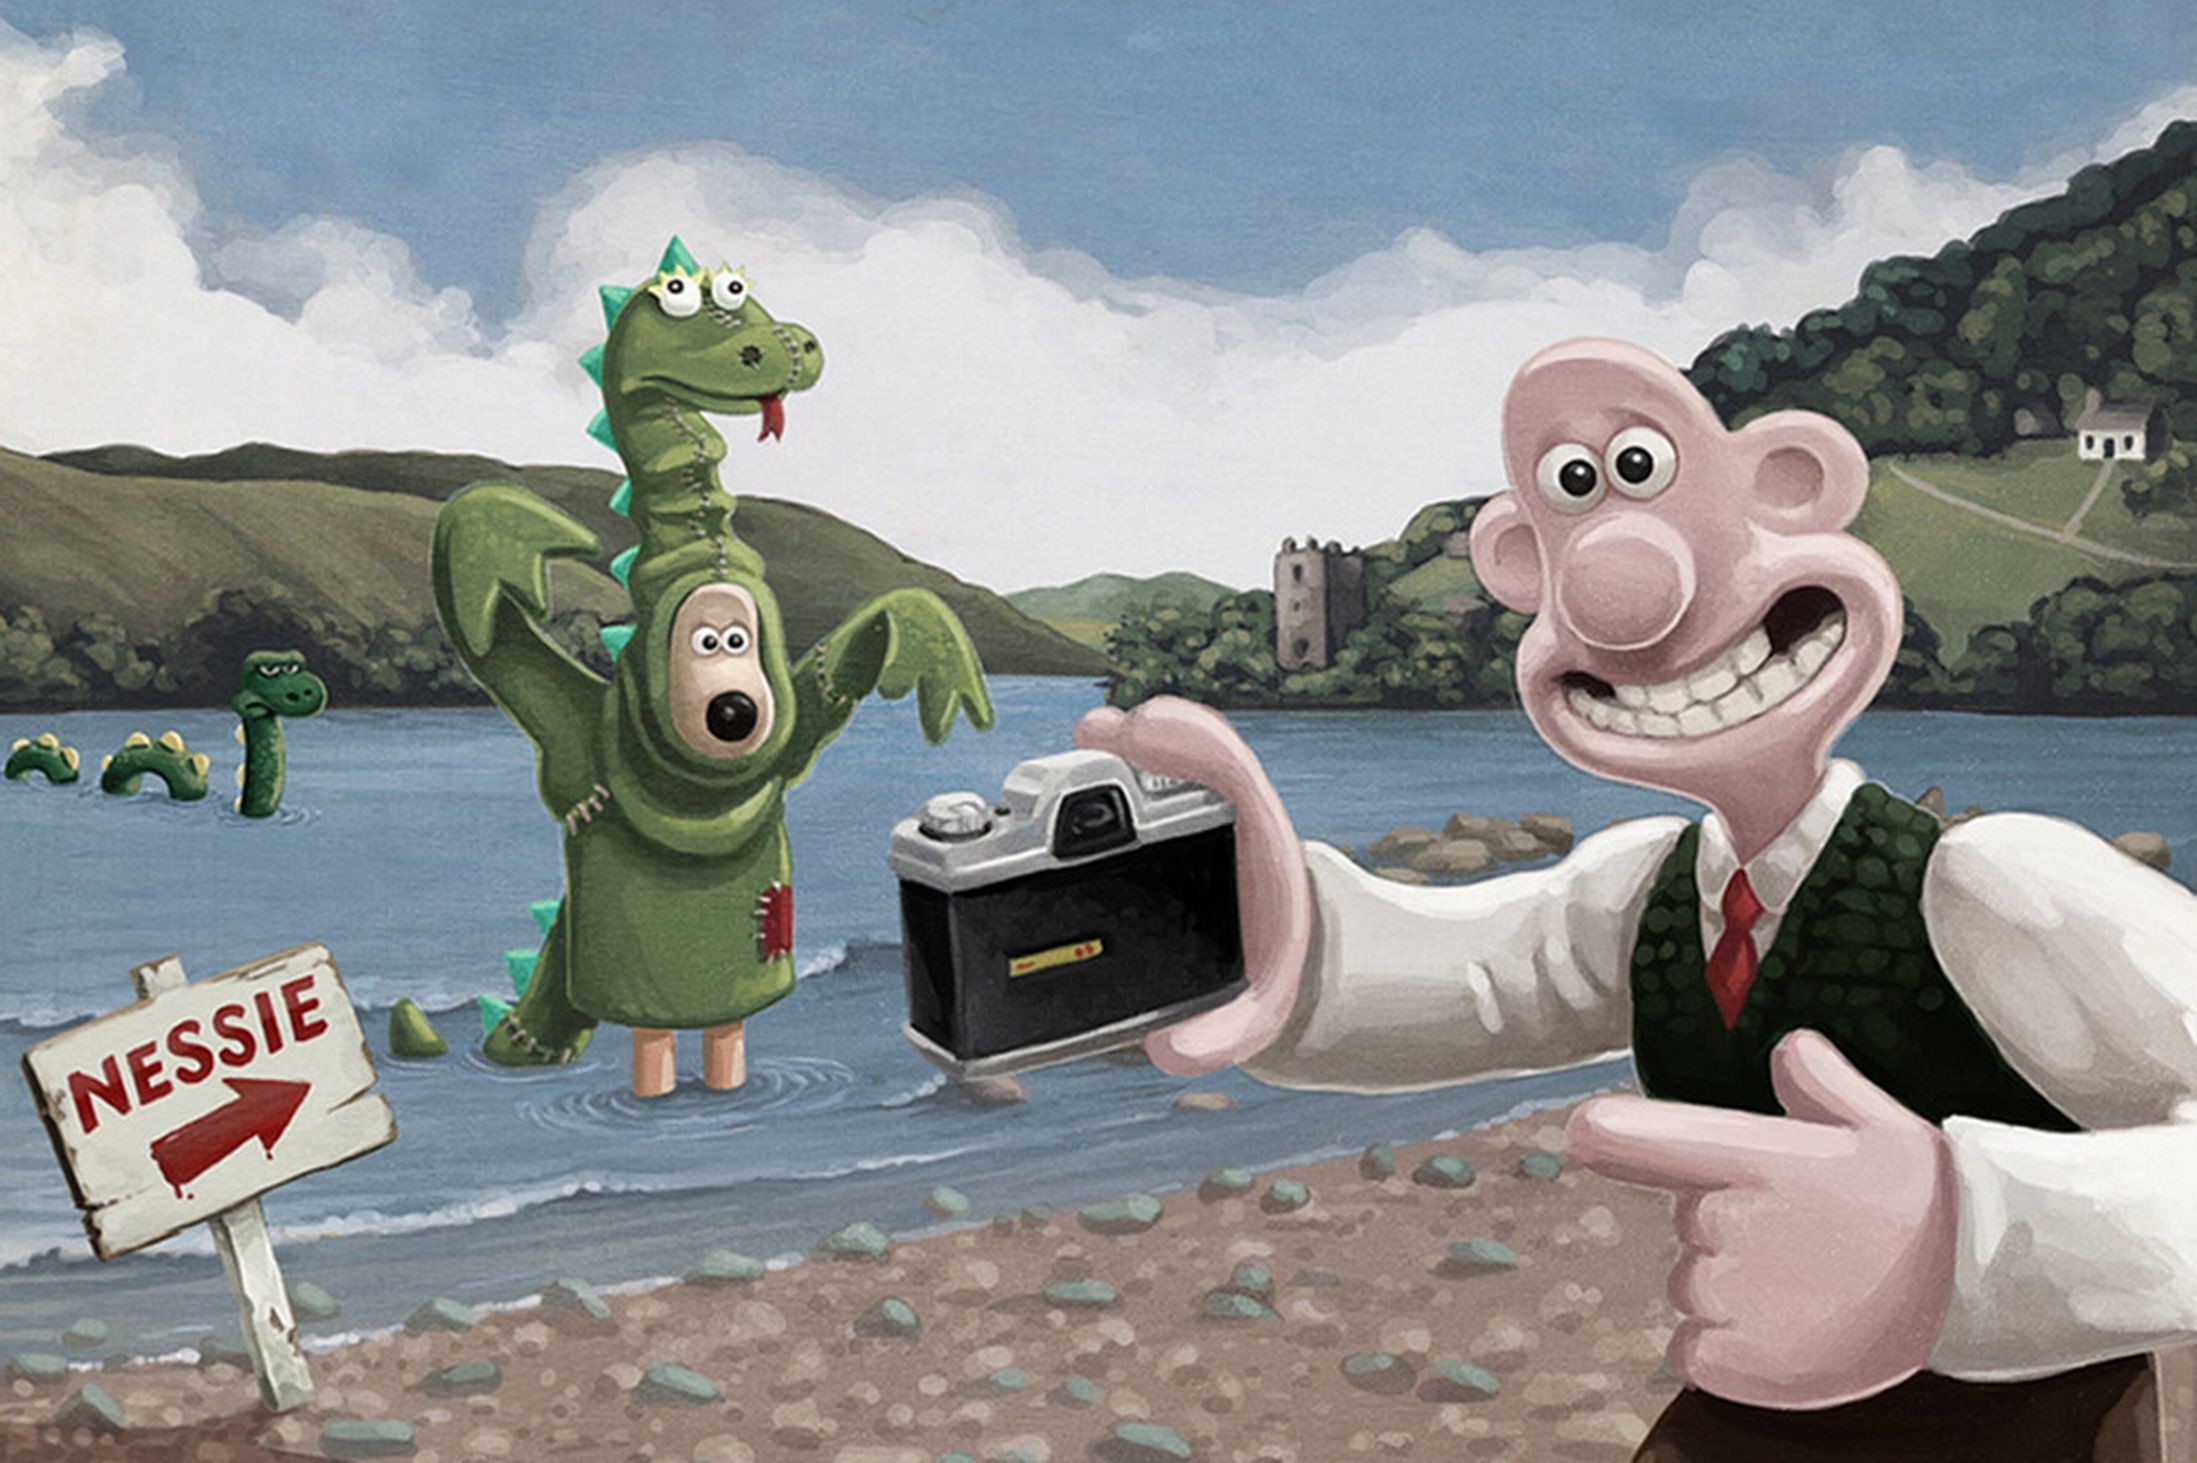 2197x1463 Wallace and Gromit star in Â£ 4m UK tourism campaign